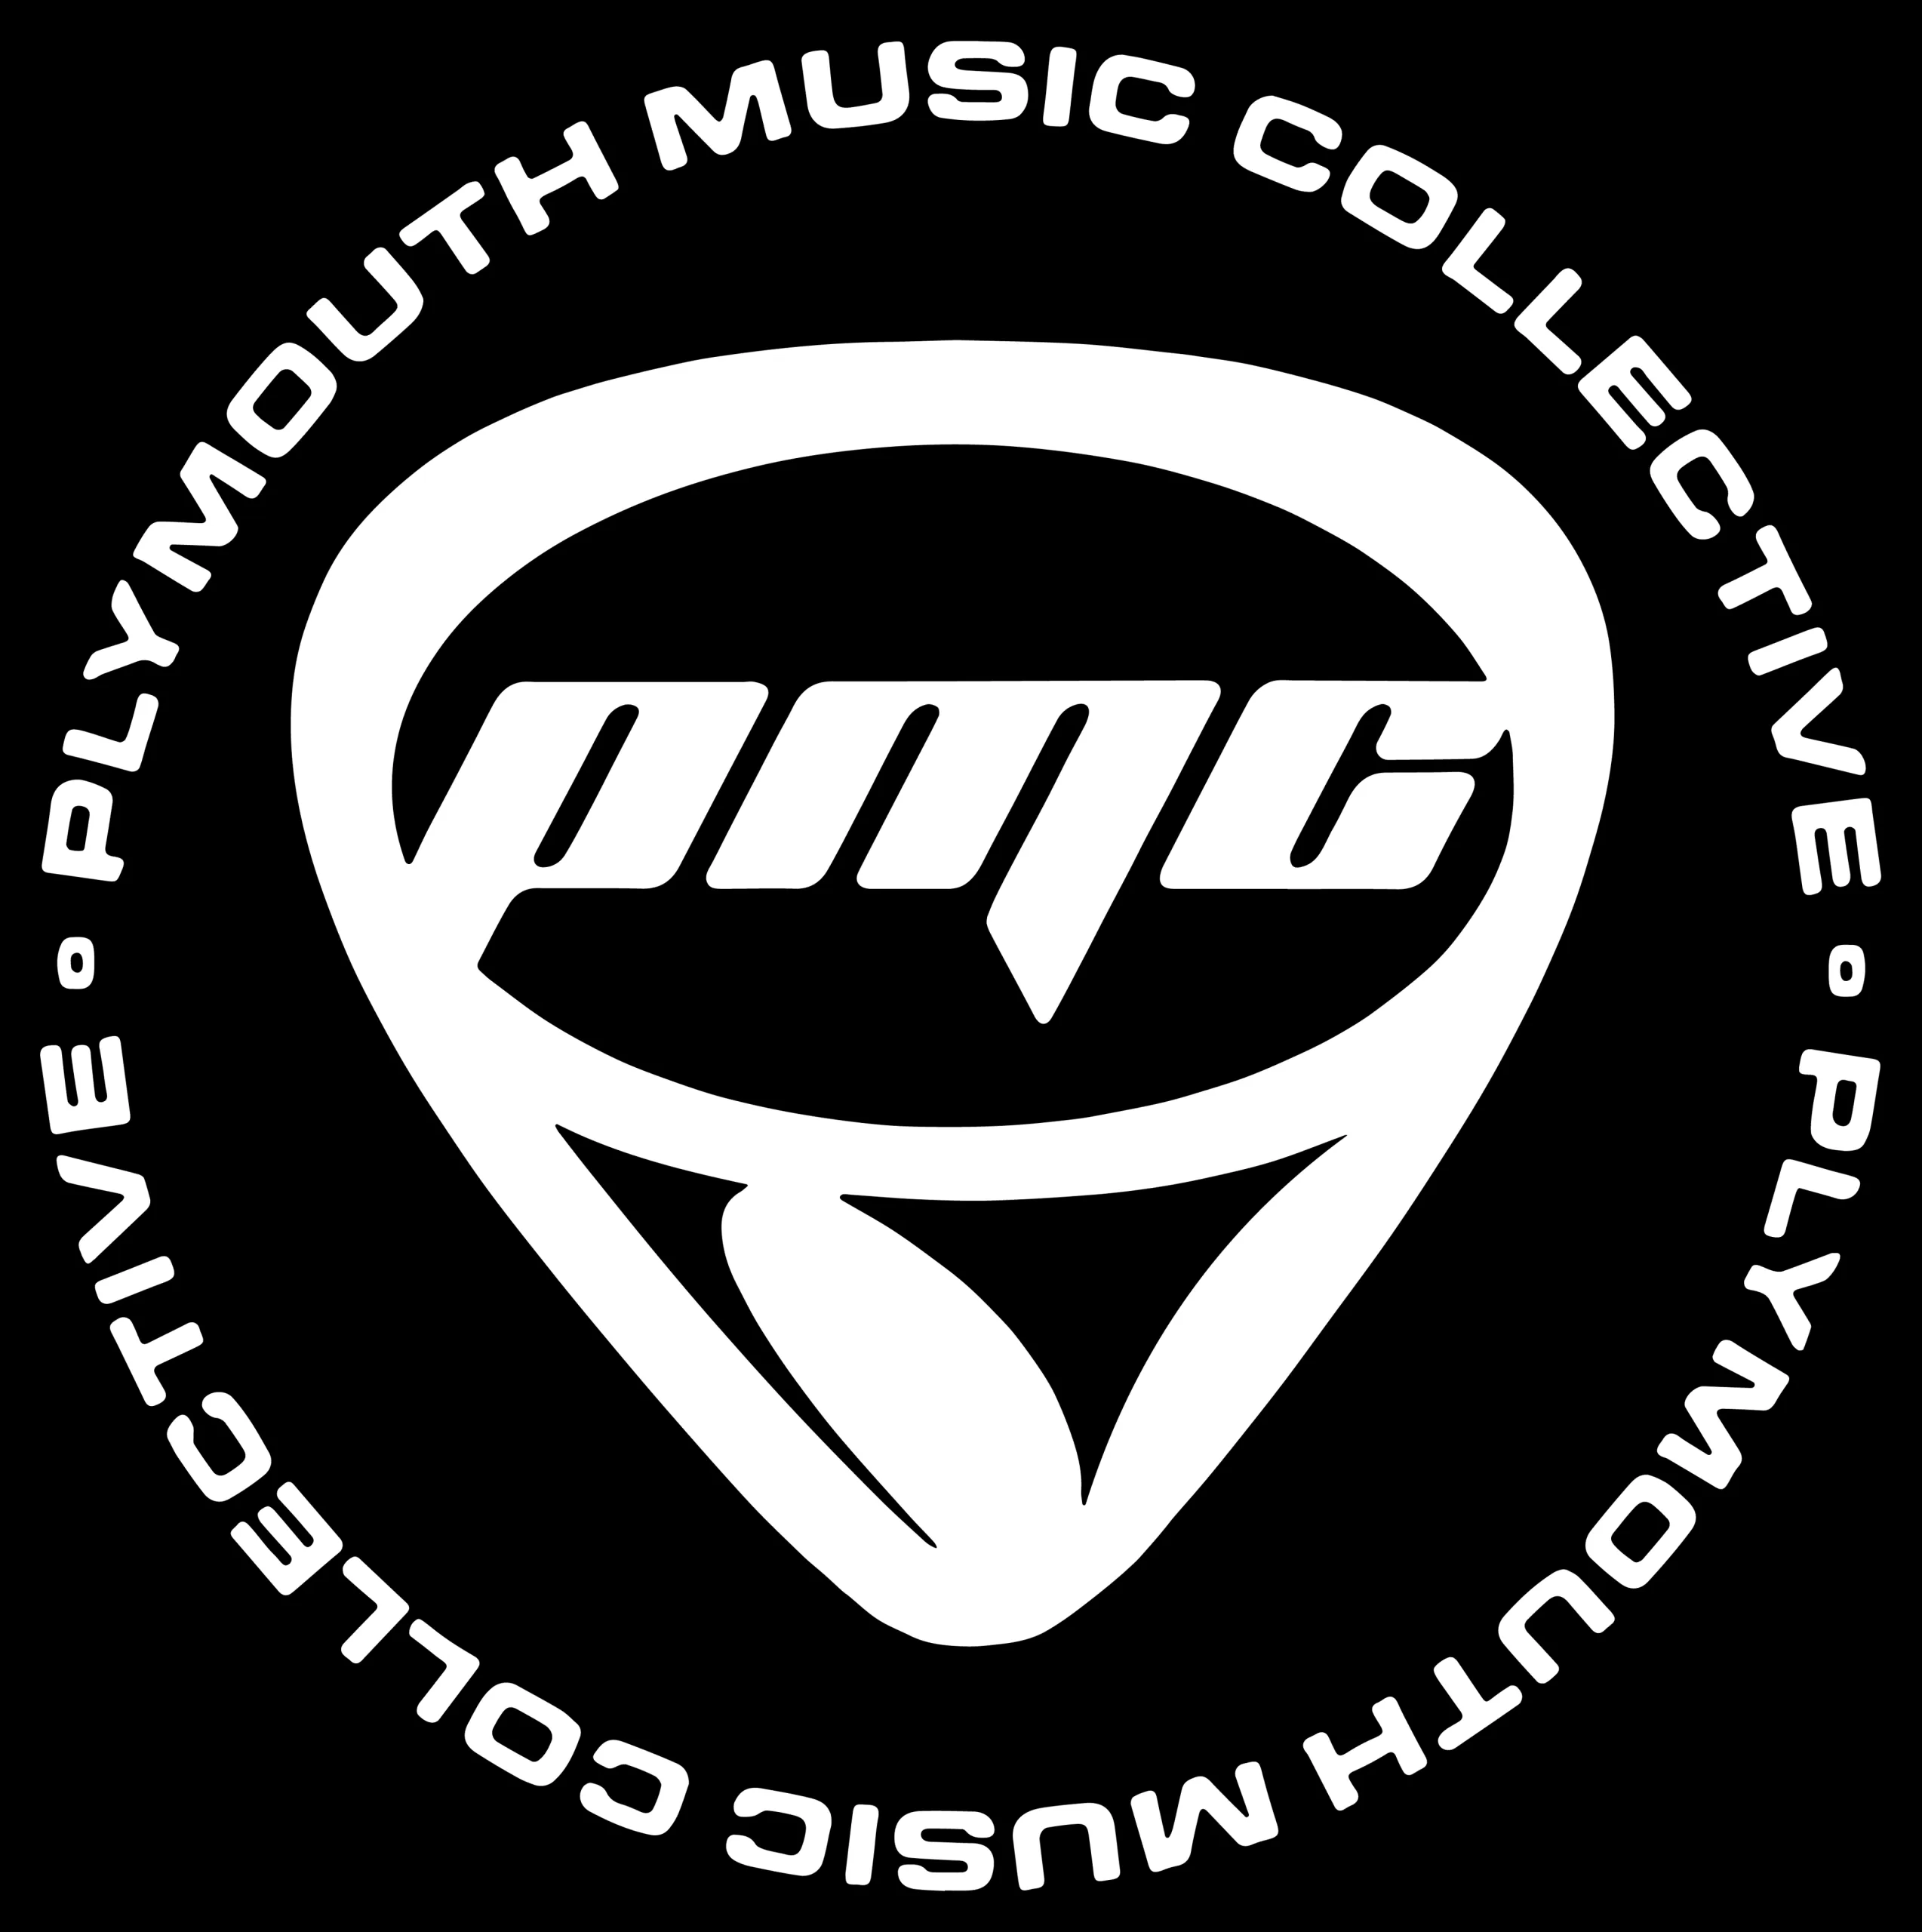 Plymouth Music Collective CIC